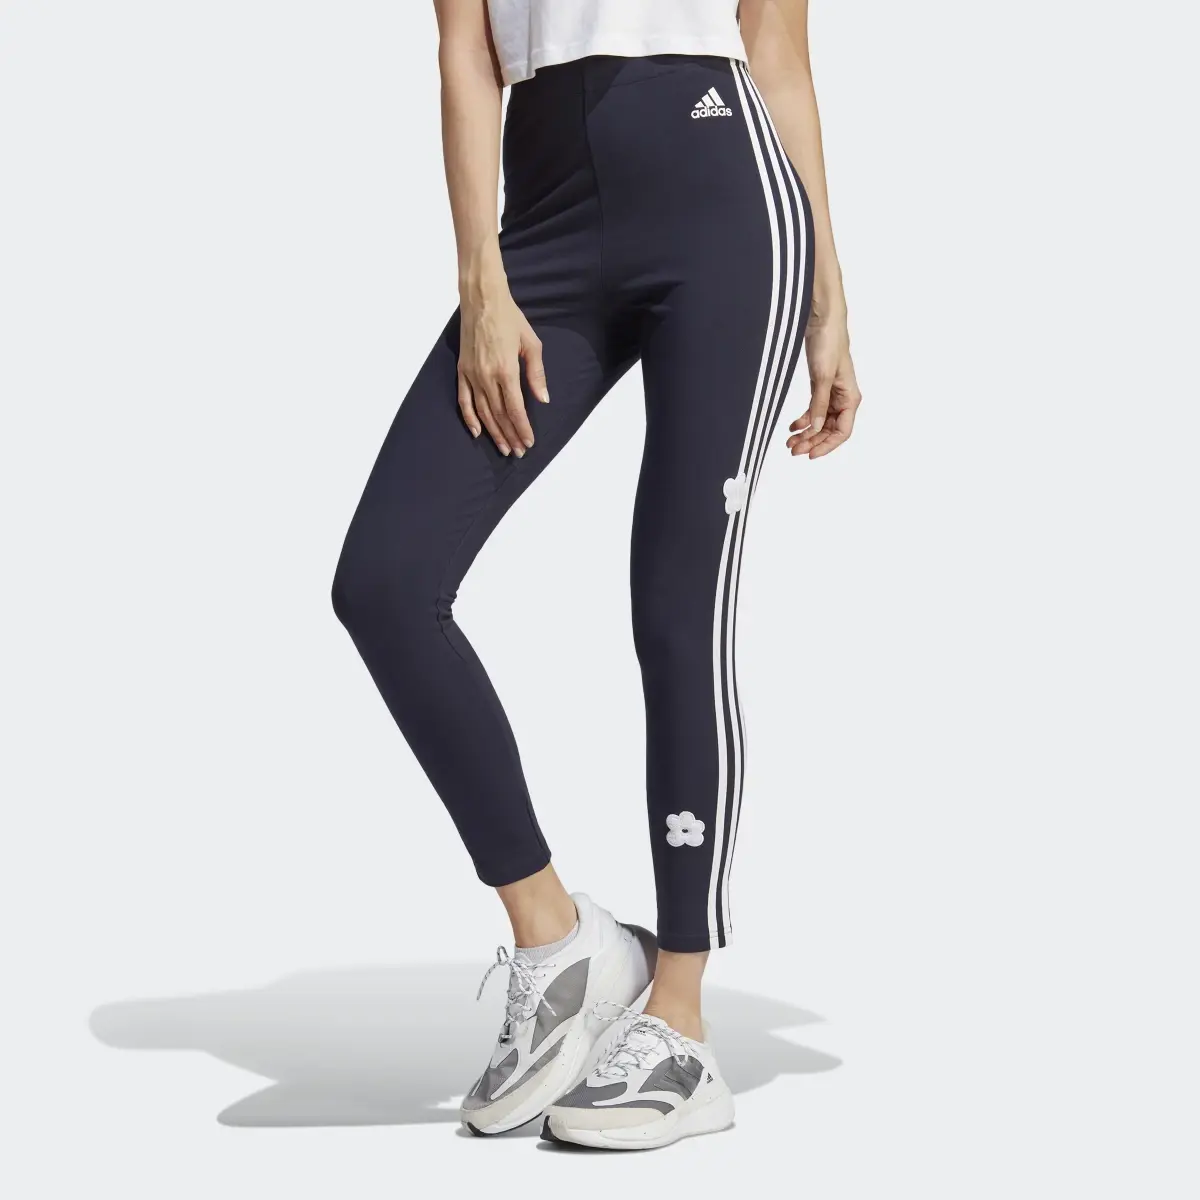 Adidas 3-Stripes High-Rise Cotton Leggings With Chenille Flower Patches. 1